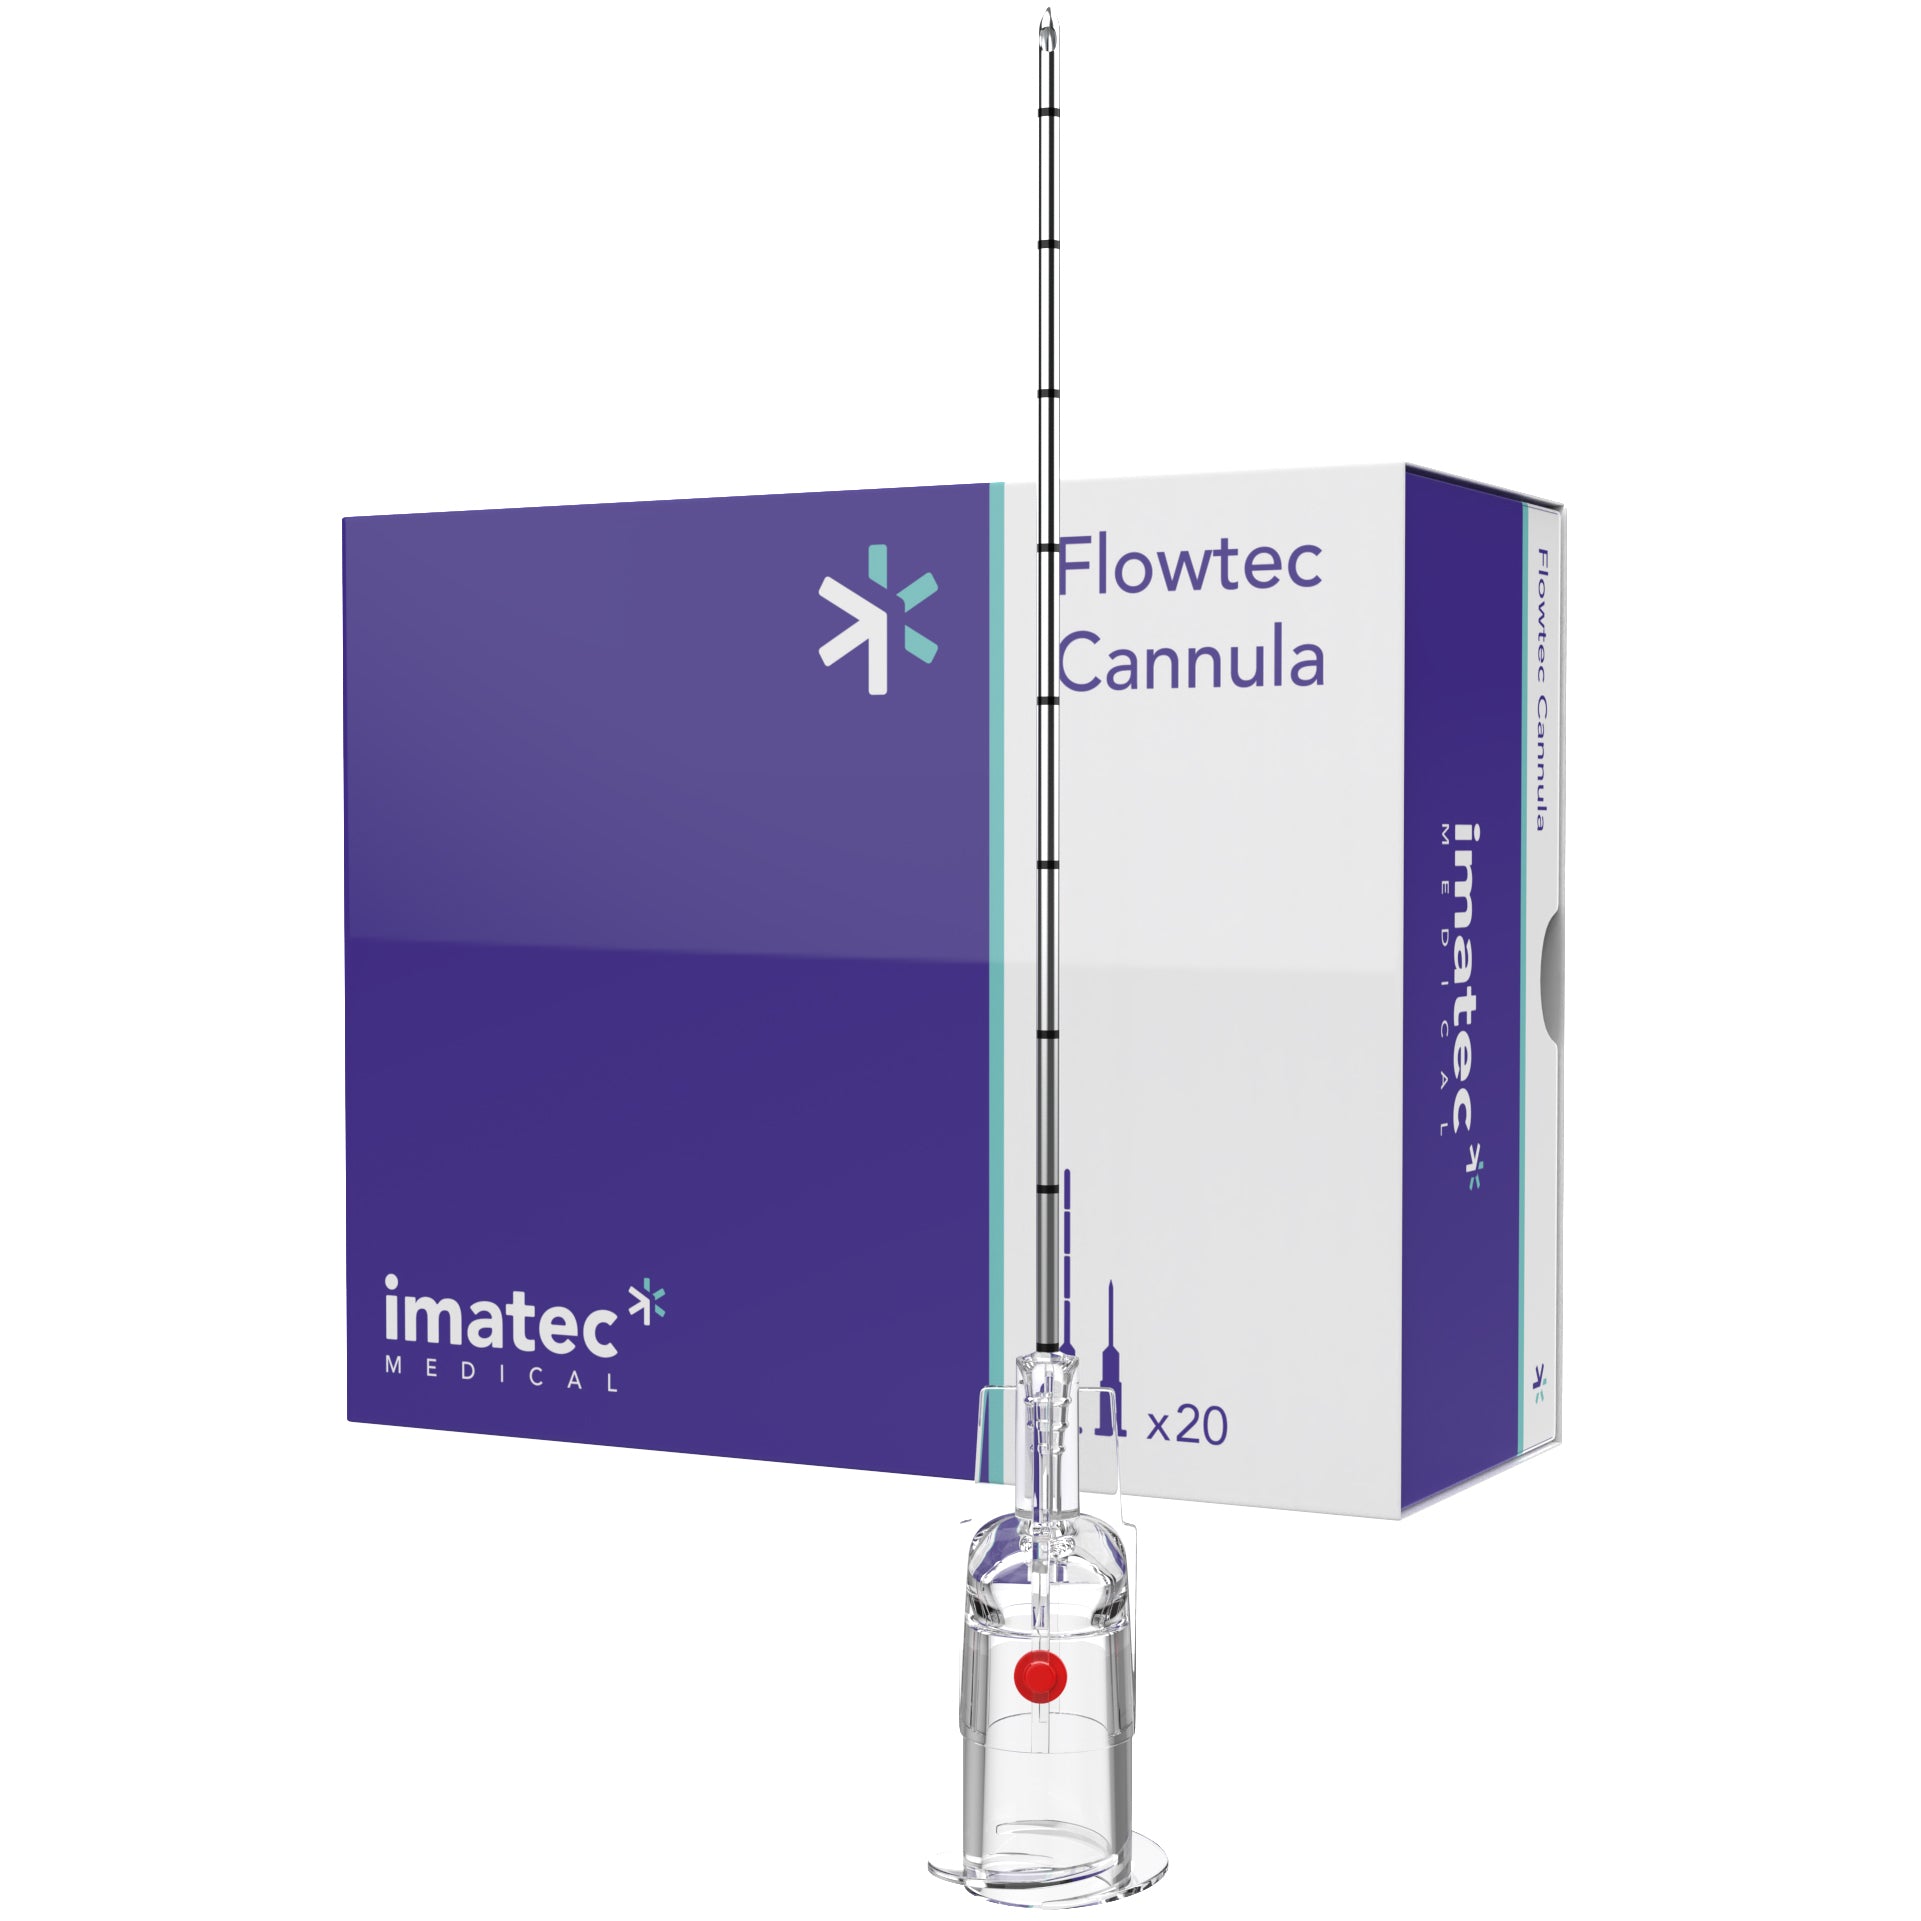 Flowtec Cannula - A Dermal Filling Cannula By Imatec Medical - Box of 20